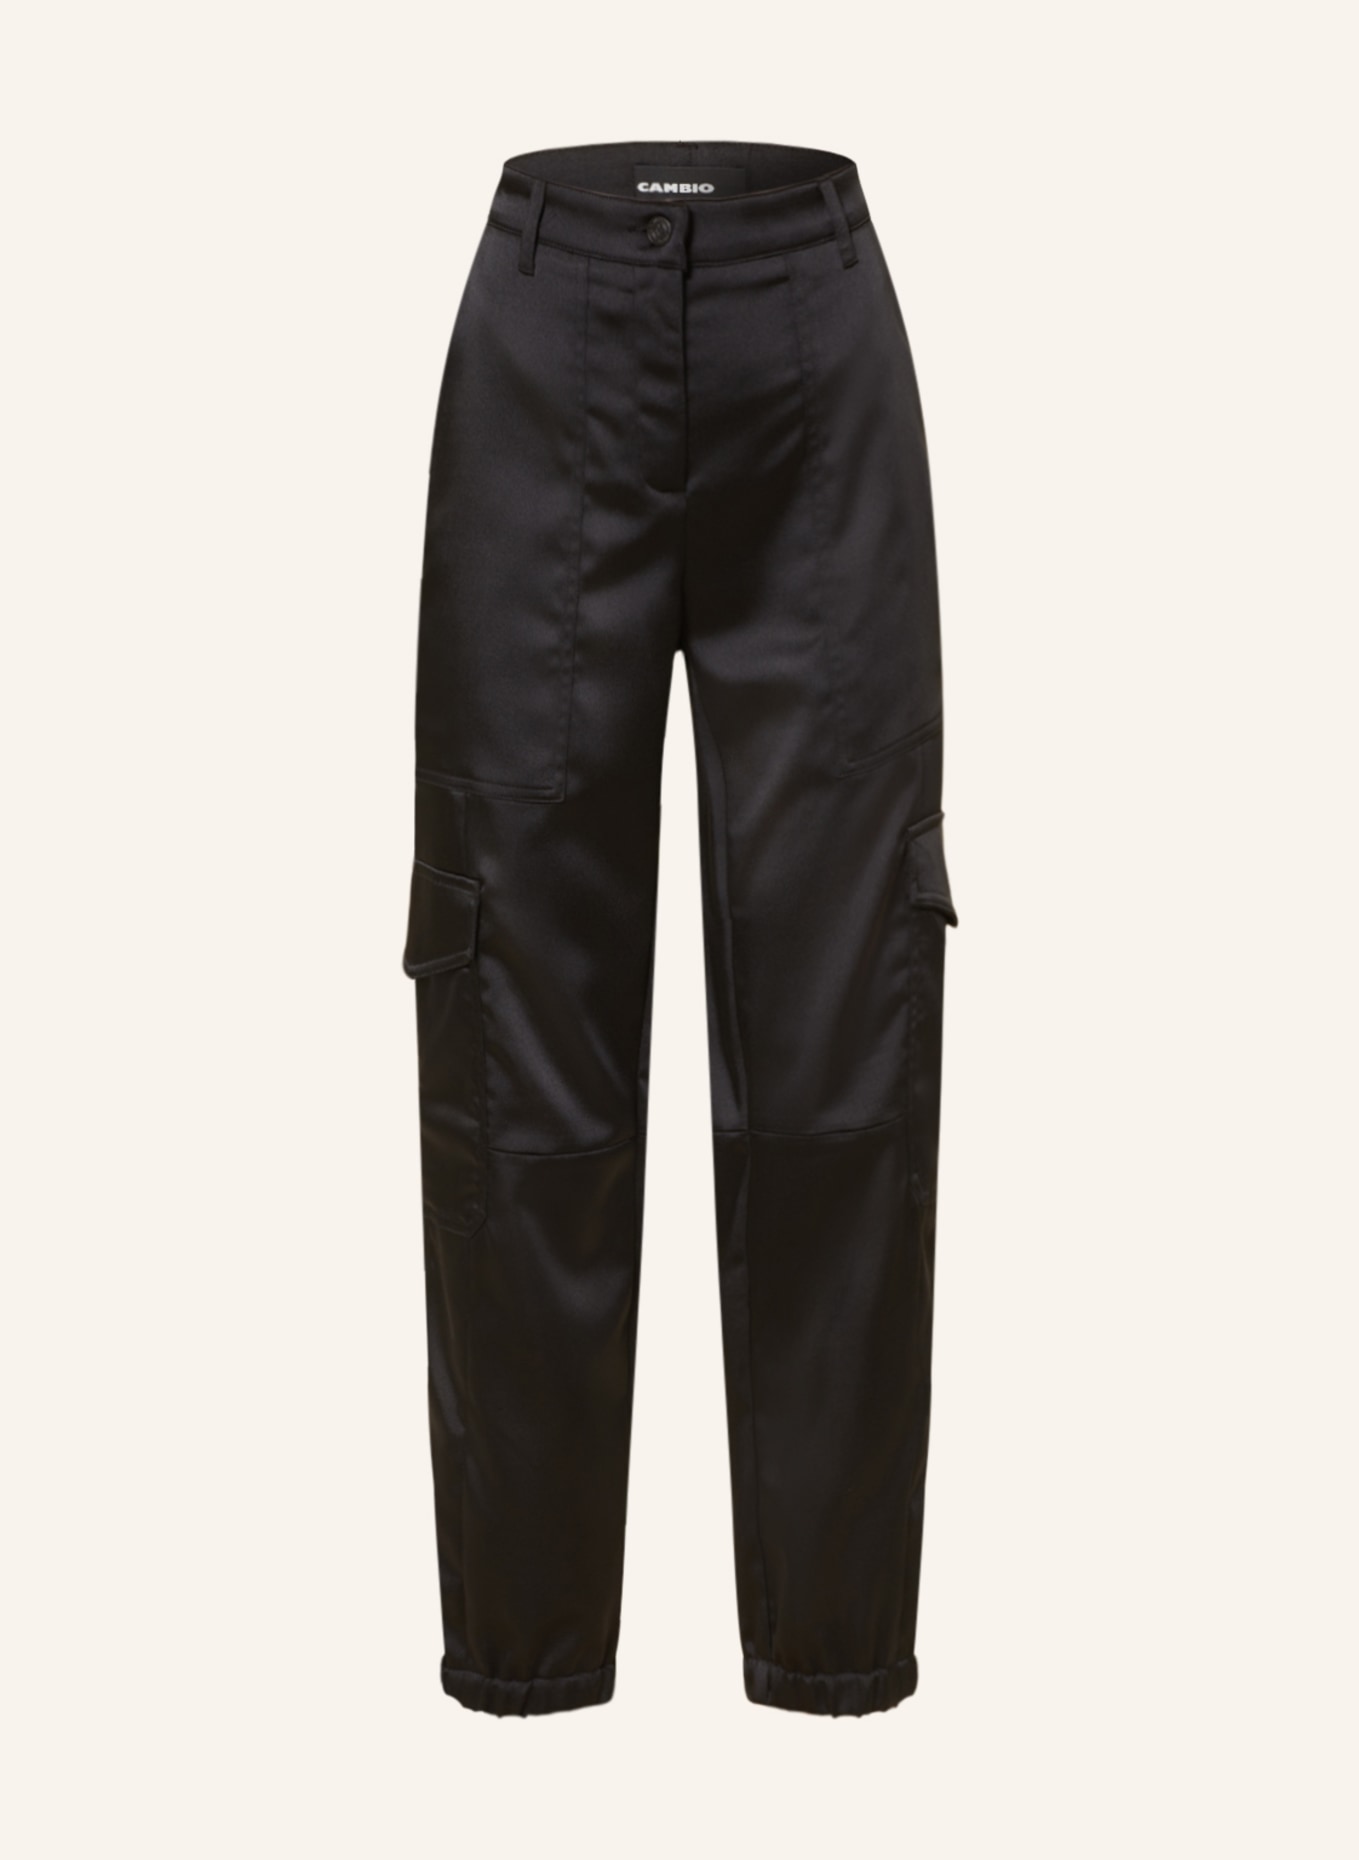 CP COMPANY | Raso Ergonomic Fit Cargo Trousers | Cargo Trousers | House of  Fraser